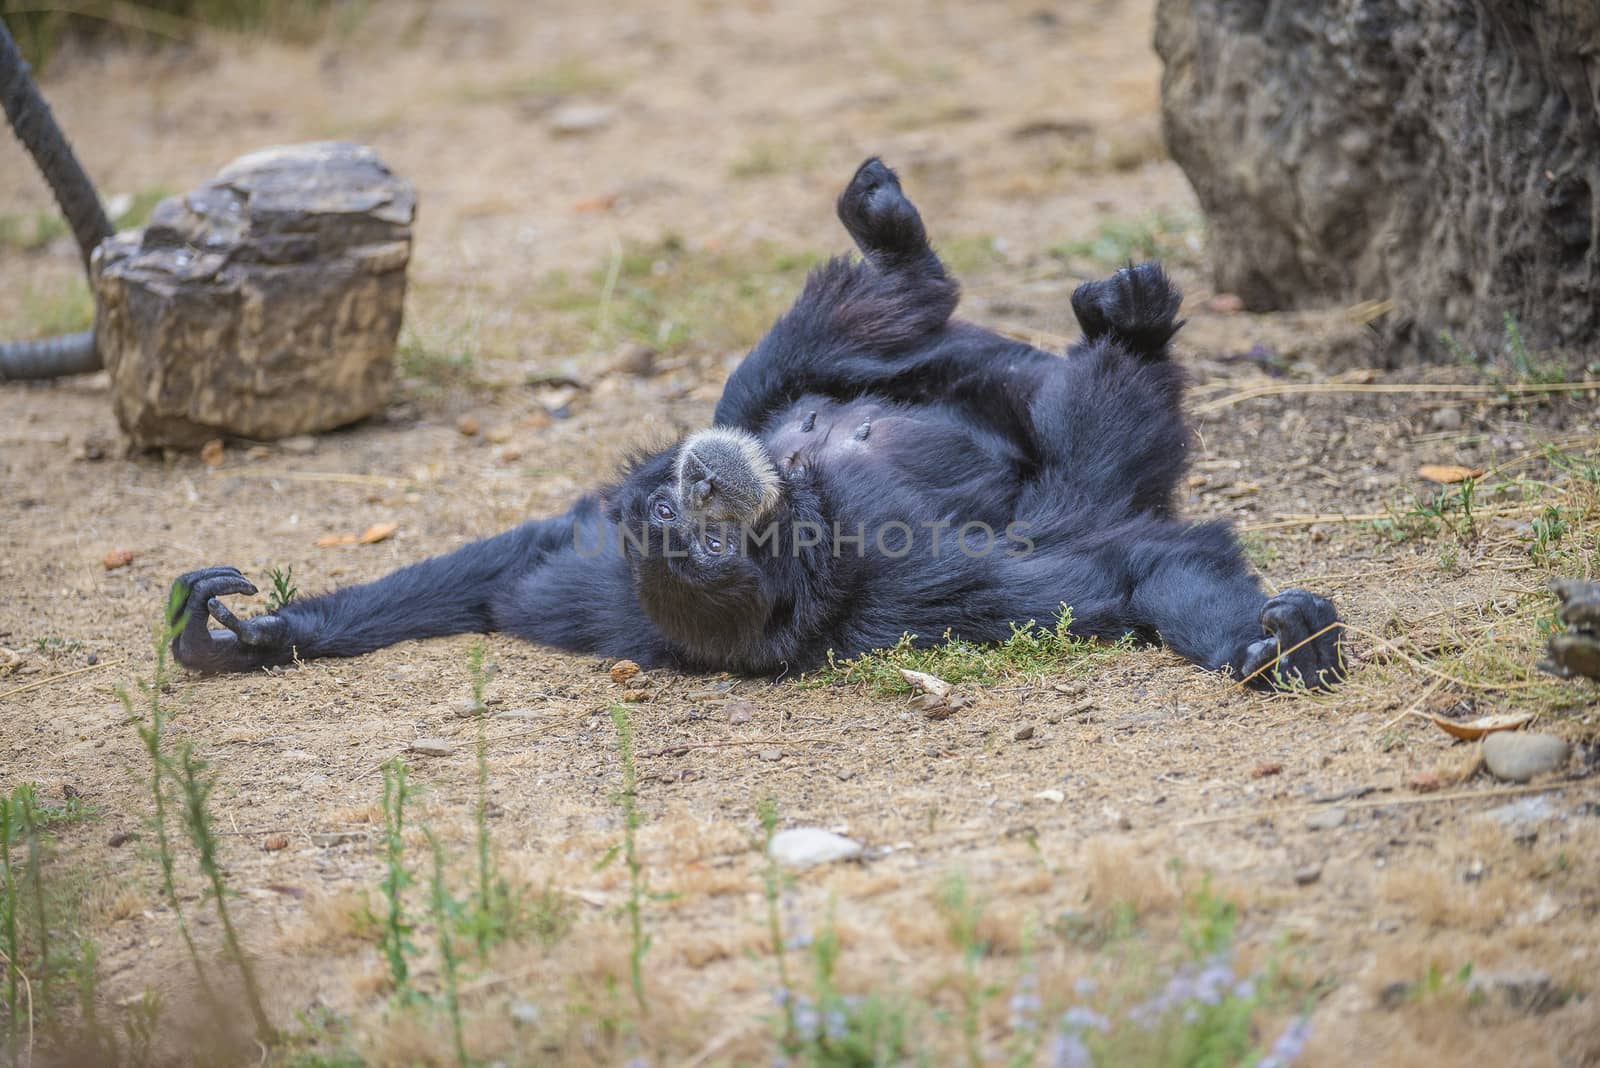 Chimpanzees are members of the Hominidae family, along with gorillas, humans, and orangutans. Photo is shot 27/07/2013.